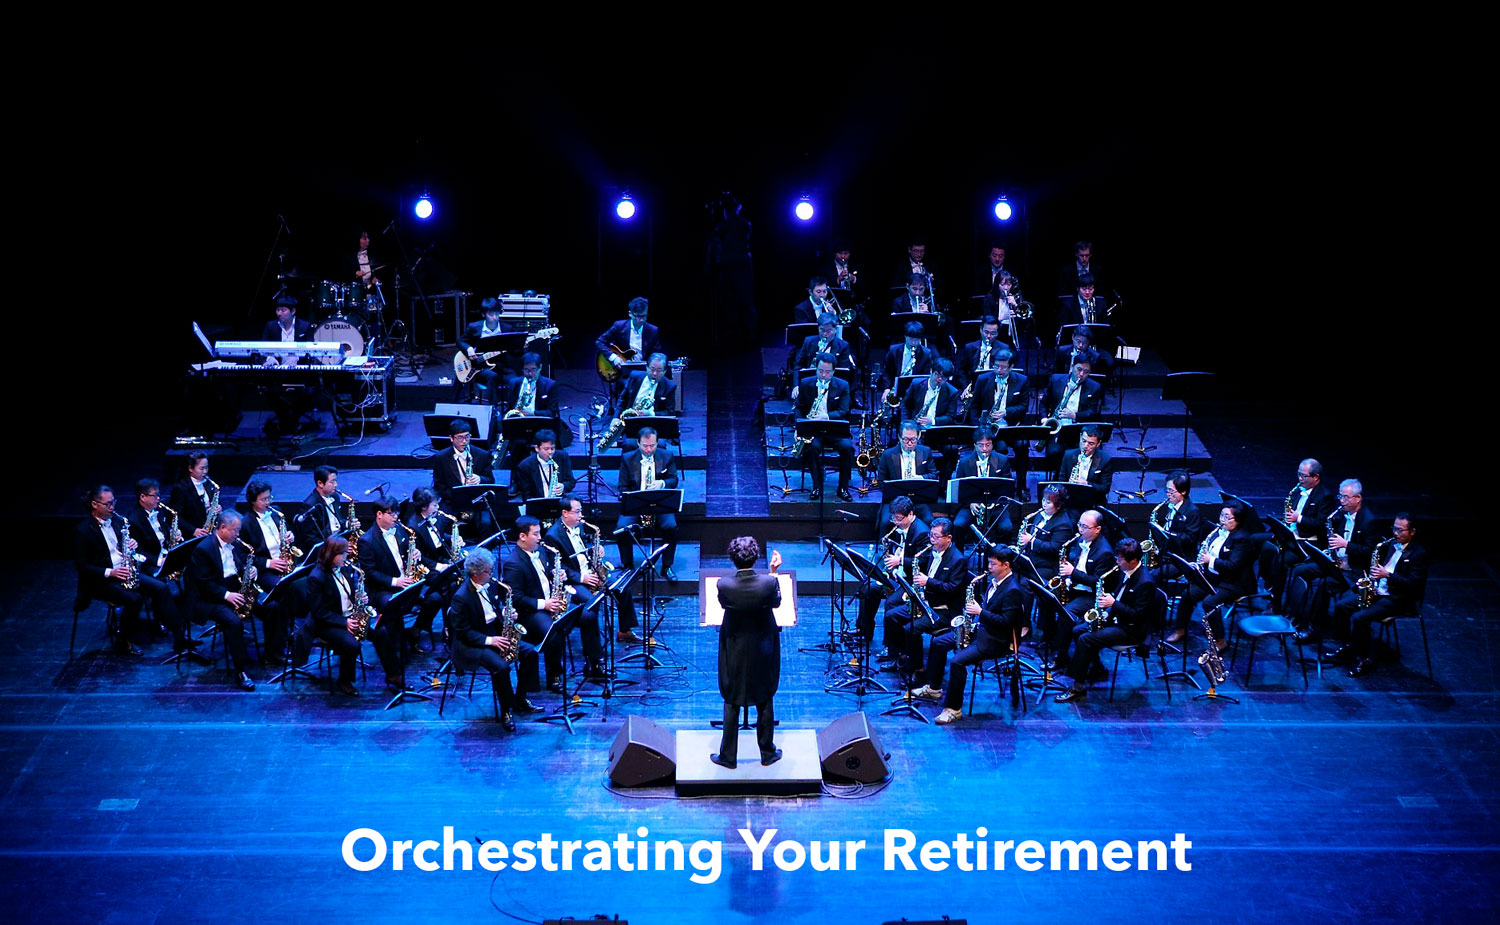 Orchestrating-Your-Retirement.jpg